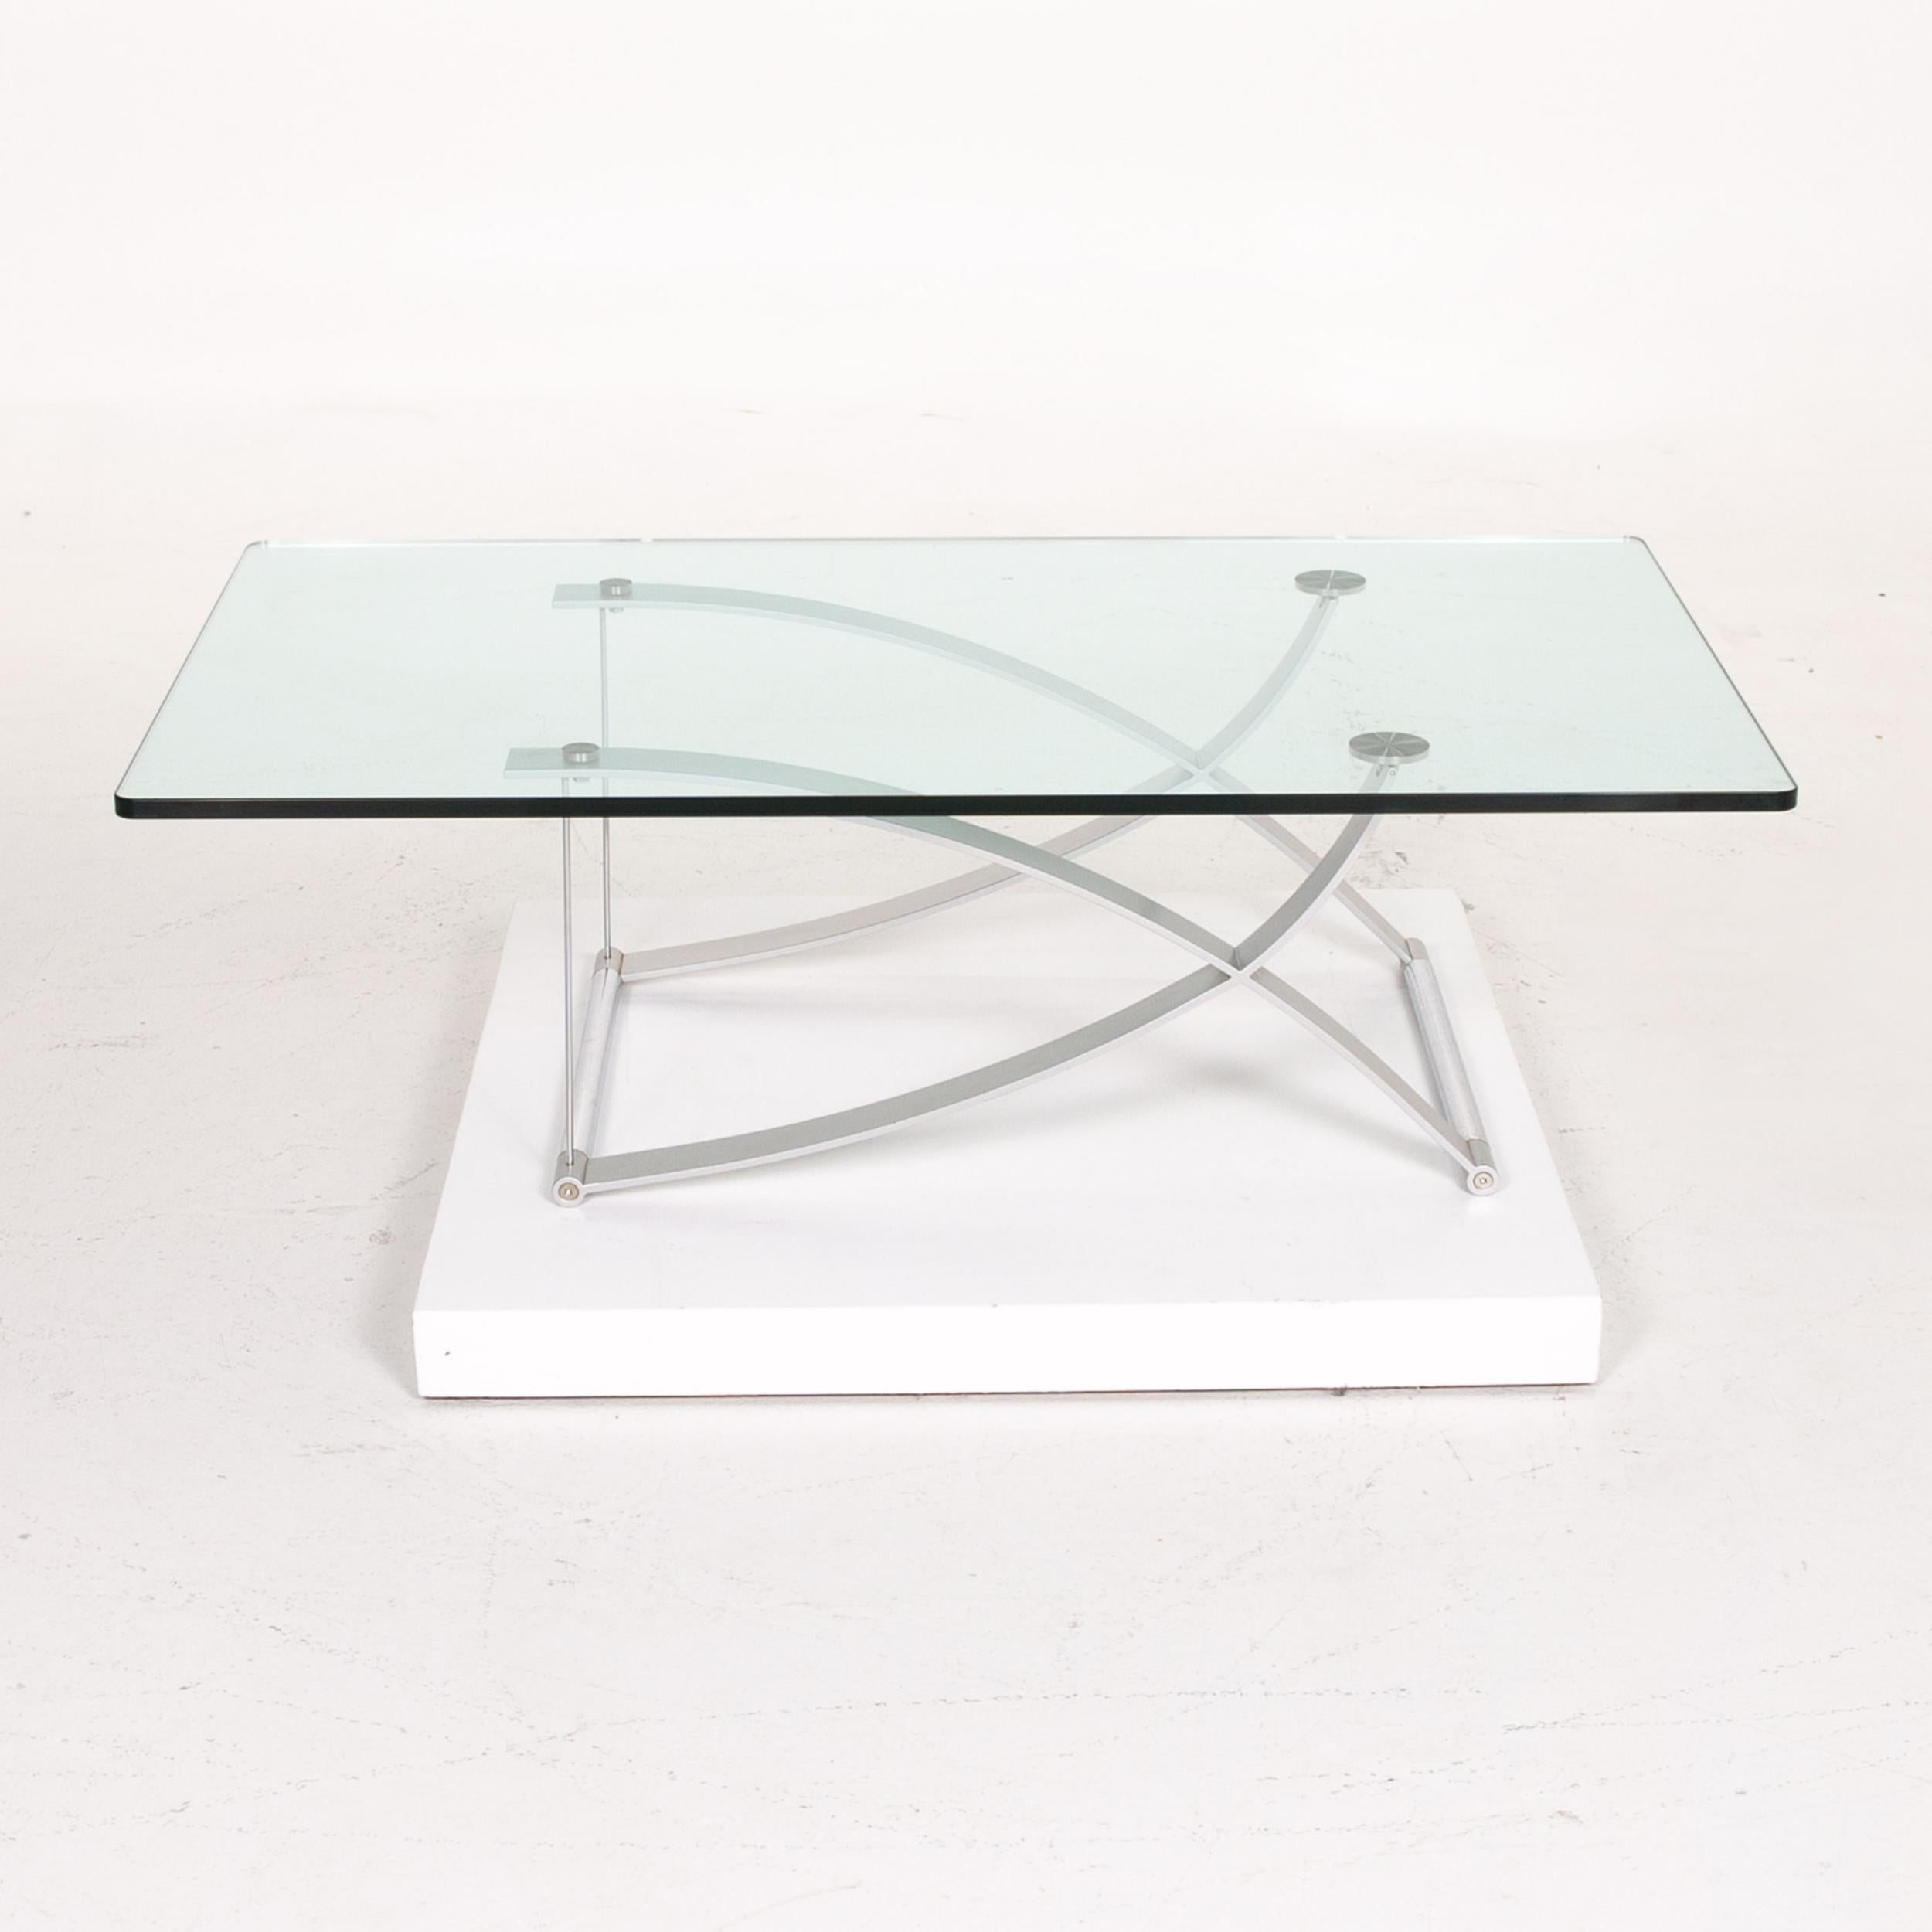 Rolf Benz RB 1150 Glass Coffee Table Metal Table For Sale 2